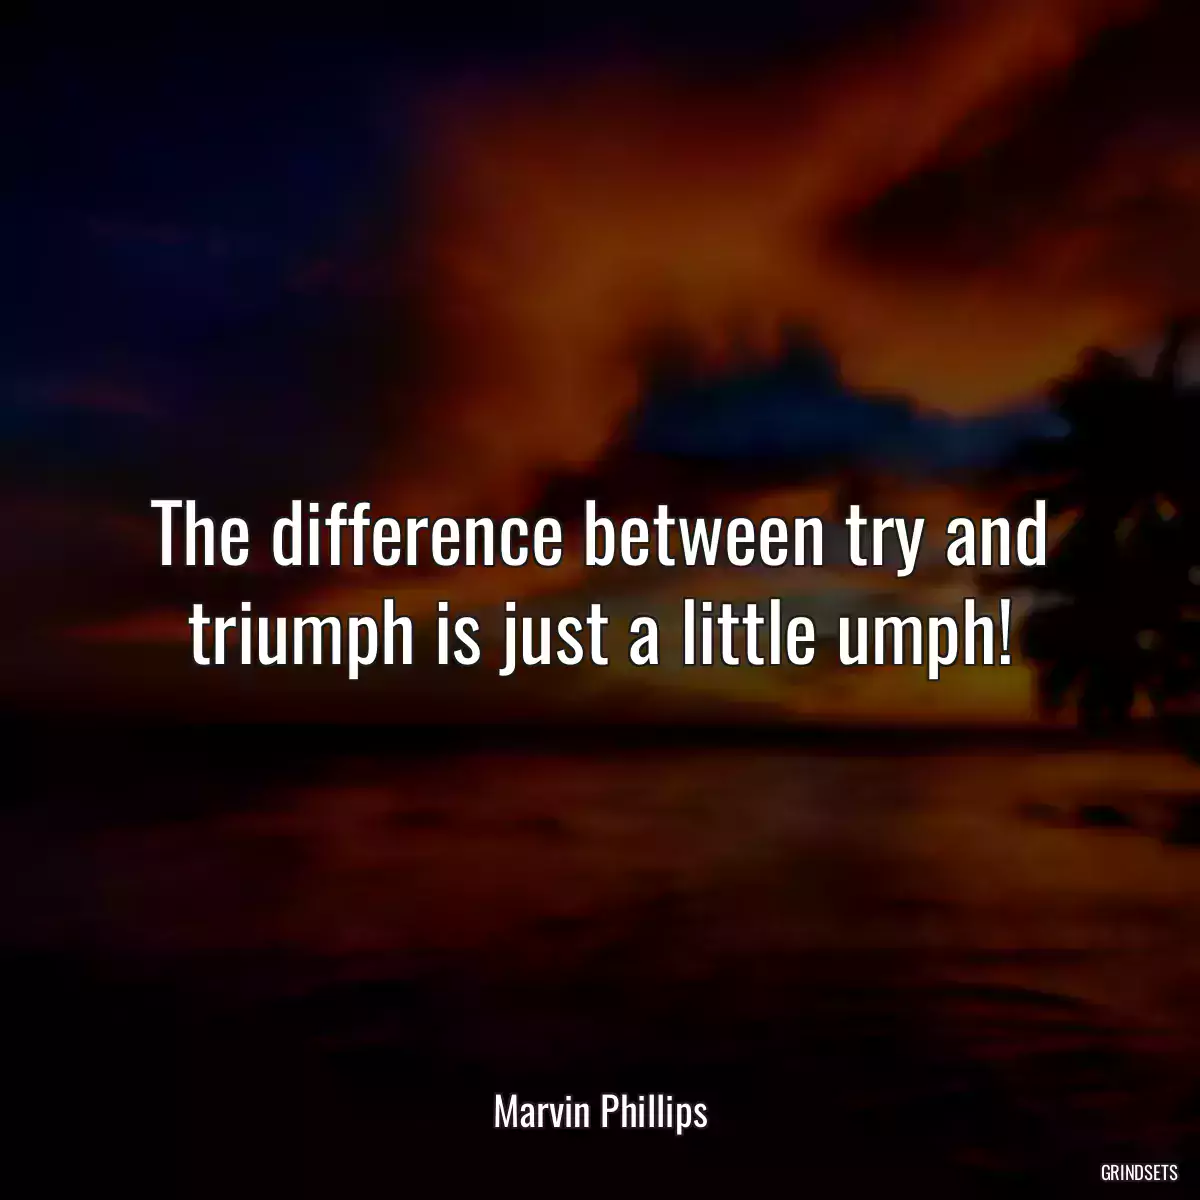 The difference between try and triumph is just a little umph!